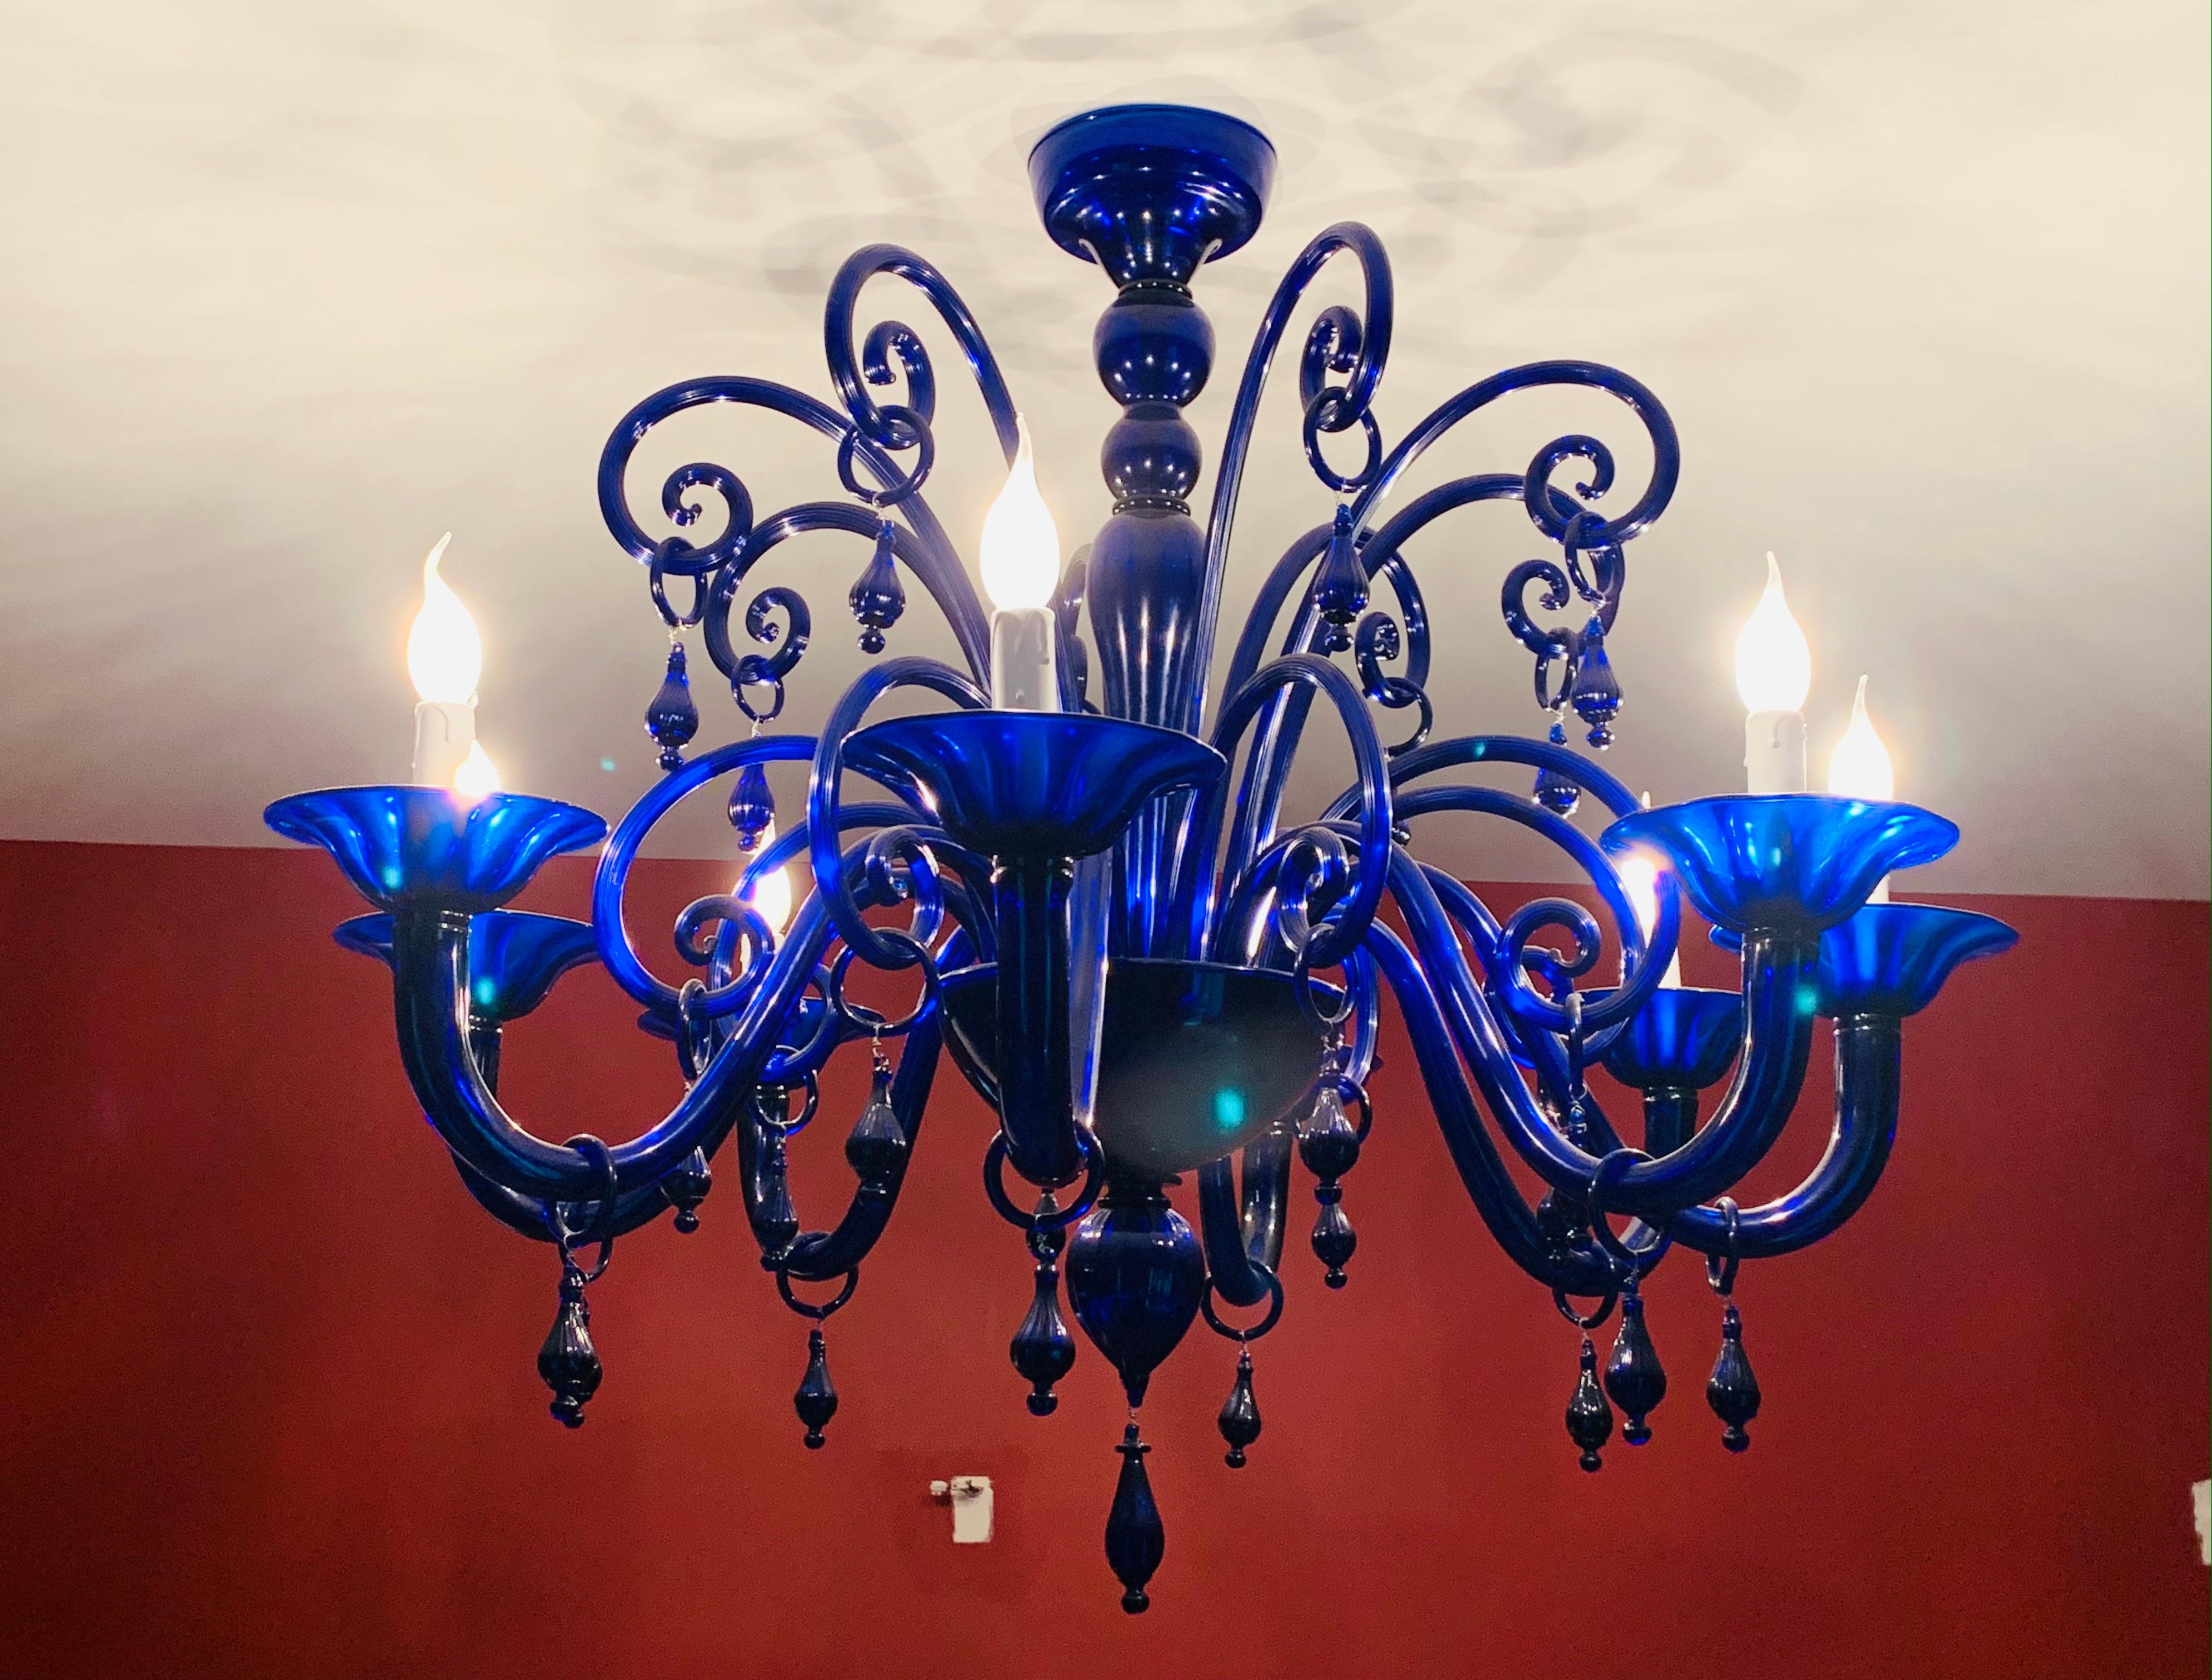 A stunning, cobalt blue, large, Italian, vintage, hand blown, Murano glass chandelier featuring unusual curled and whimsical glass scrolls. The chandelier is all the more striking because of its colour and the decorative droplets which hang from